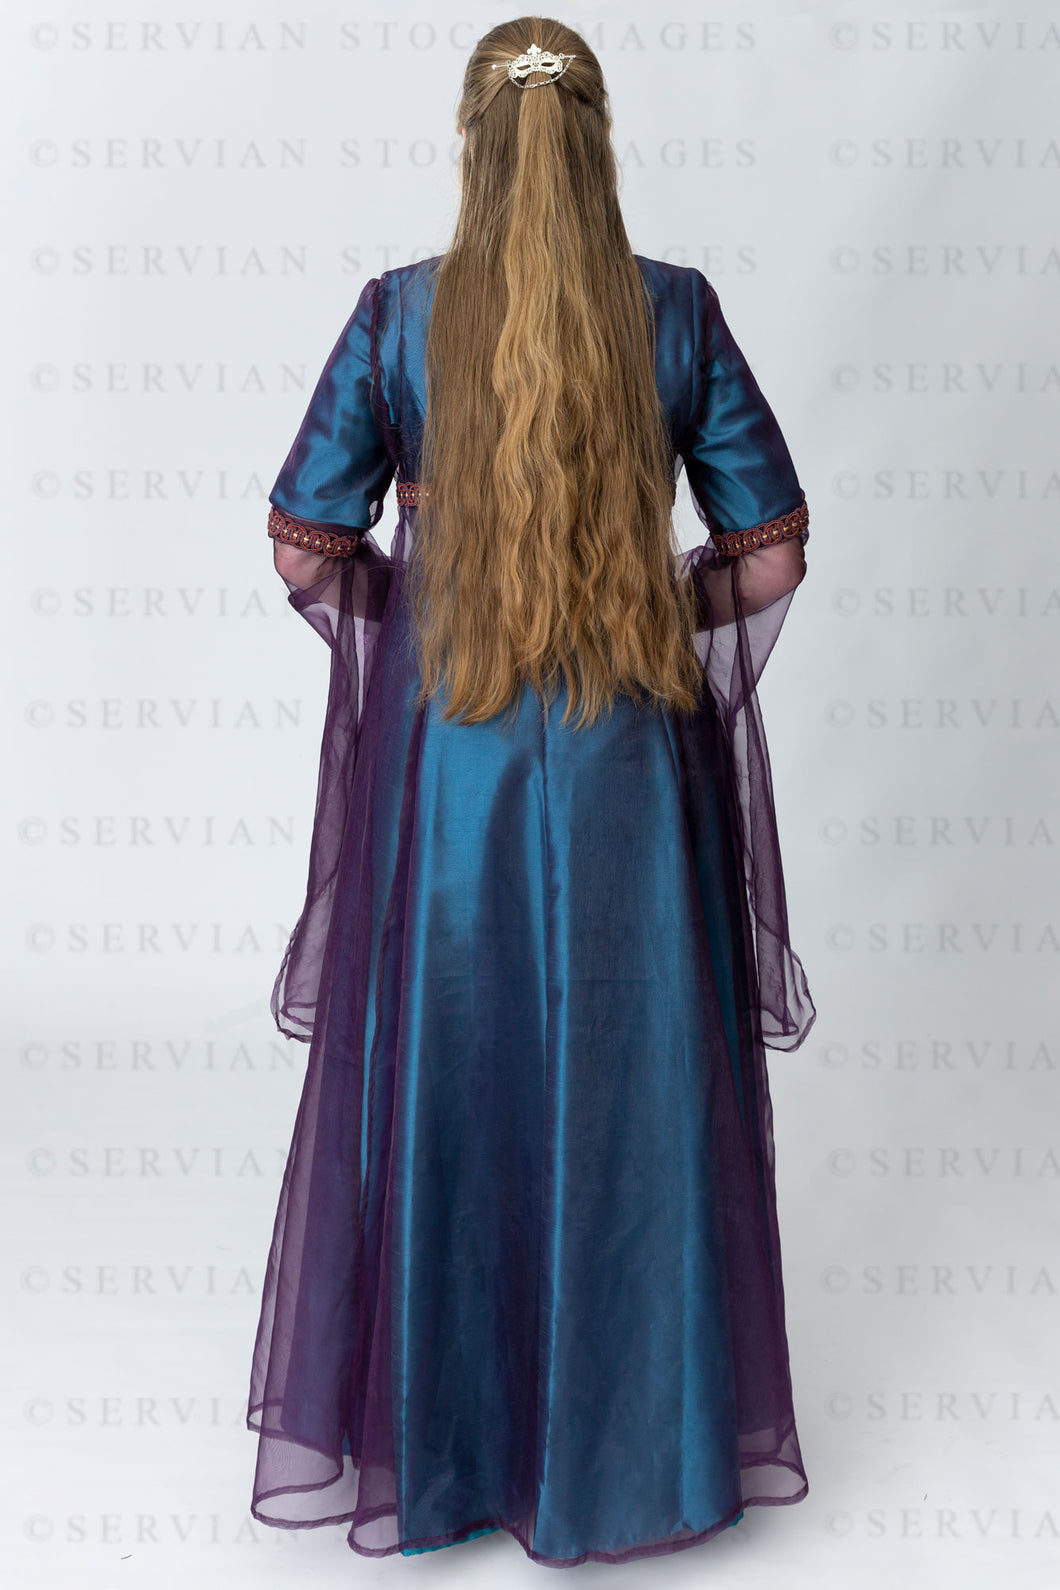 Medieval or High fantasy woman with long hair shown from back view (Katherine5047)